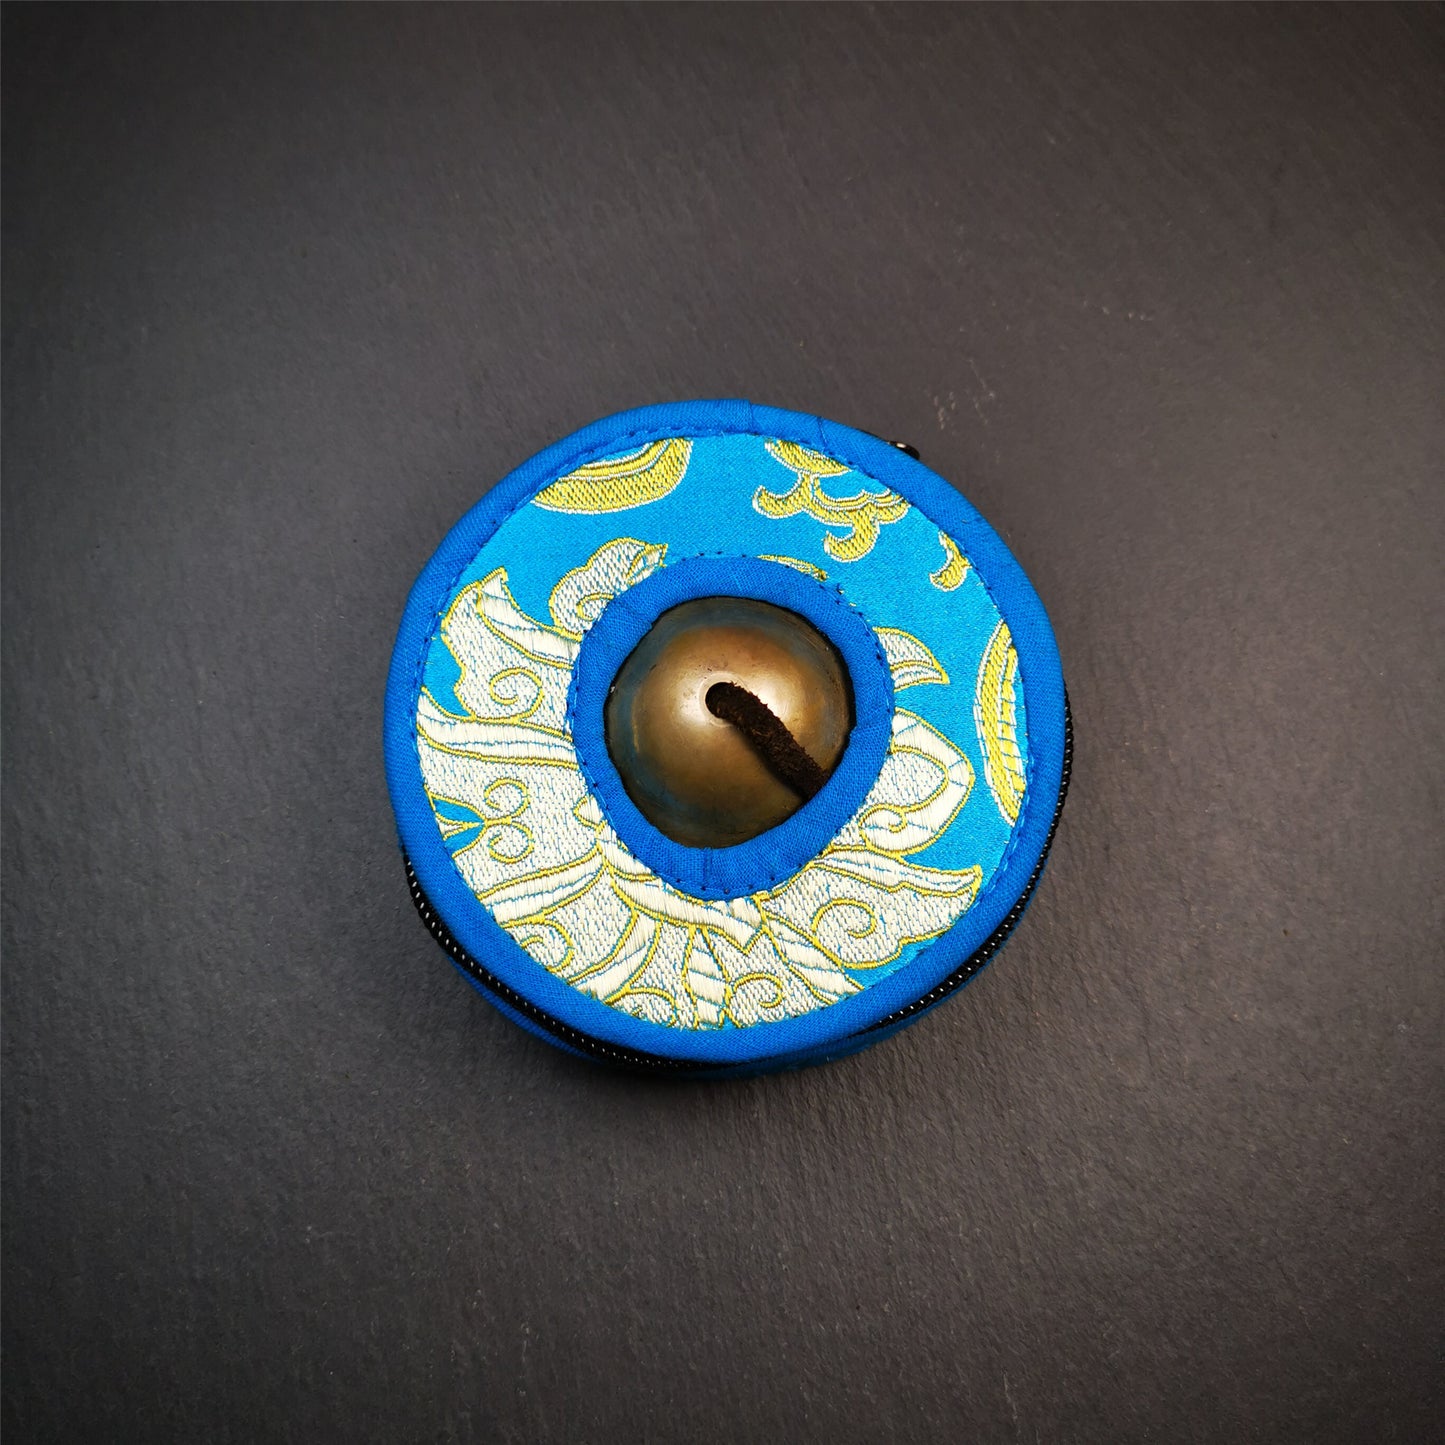 This tingsha bell set was handmade in Nepal,using traditional techniques and materials. It was made of copper,8.3cm diameter,with pure, clear and resonant,good for meditation. Come with tingsha case.